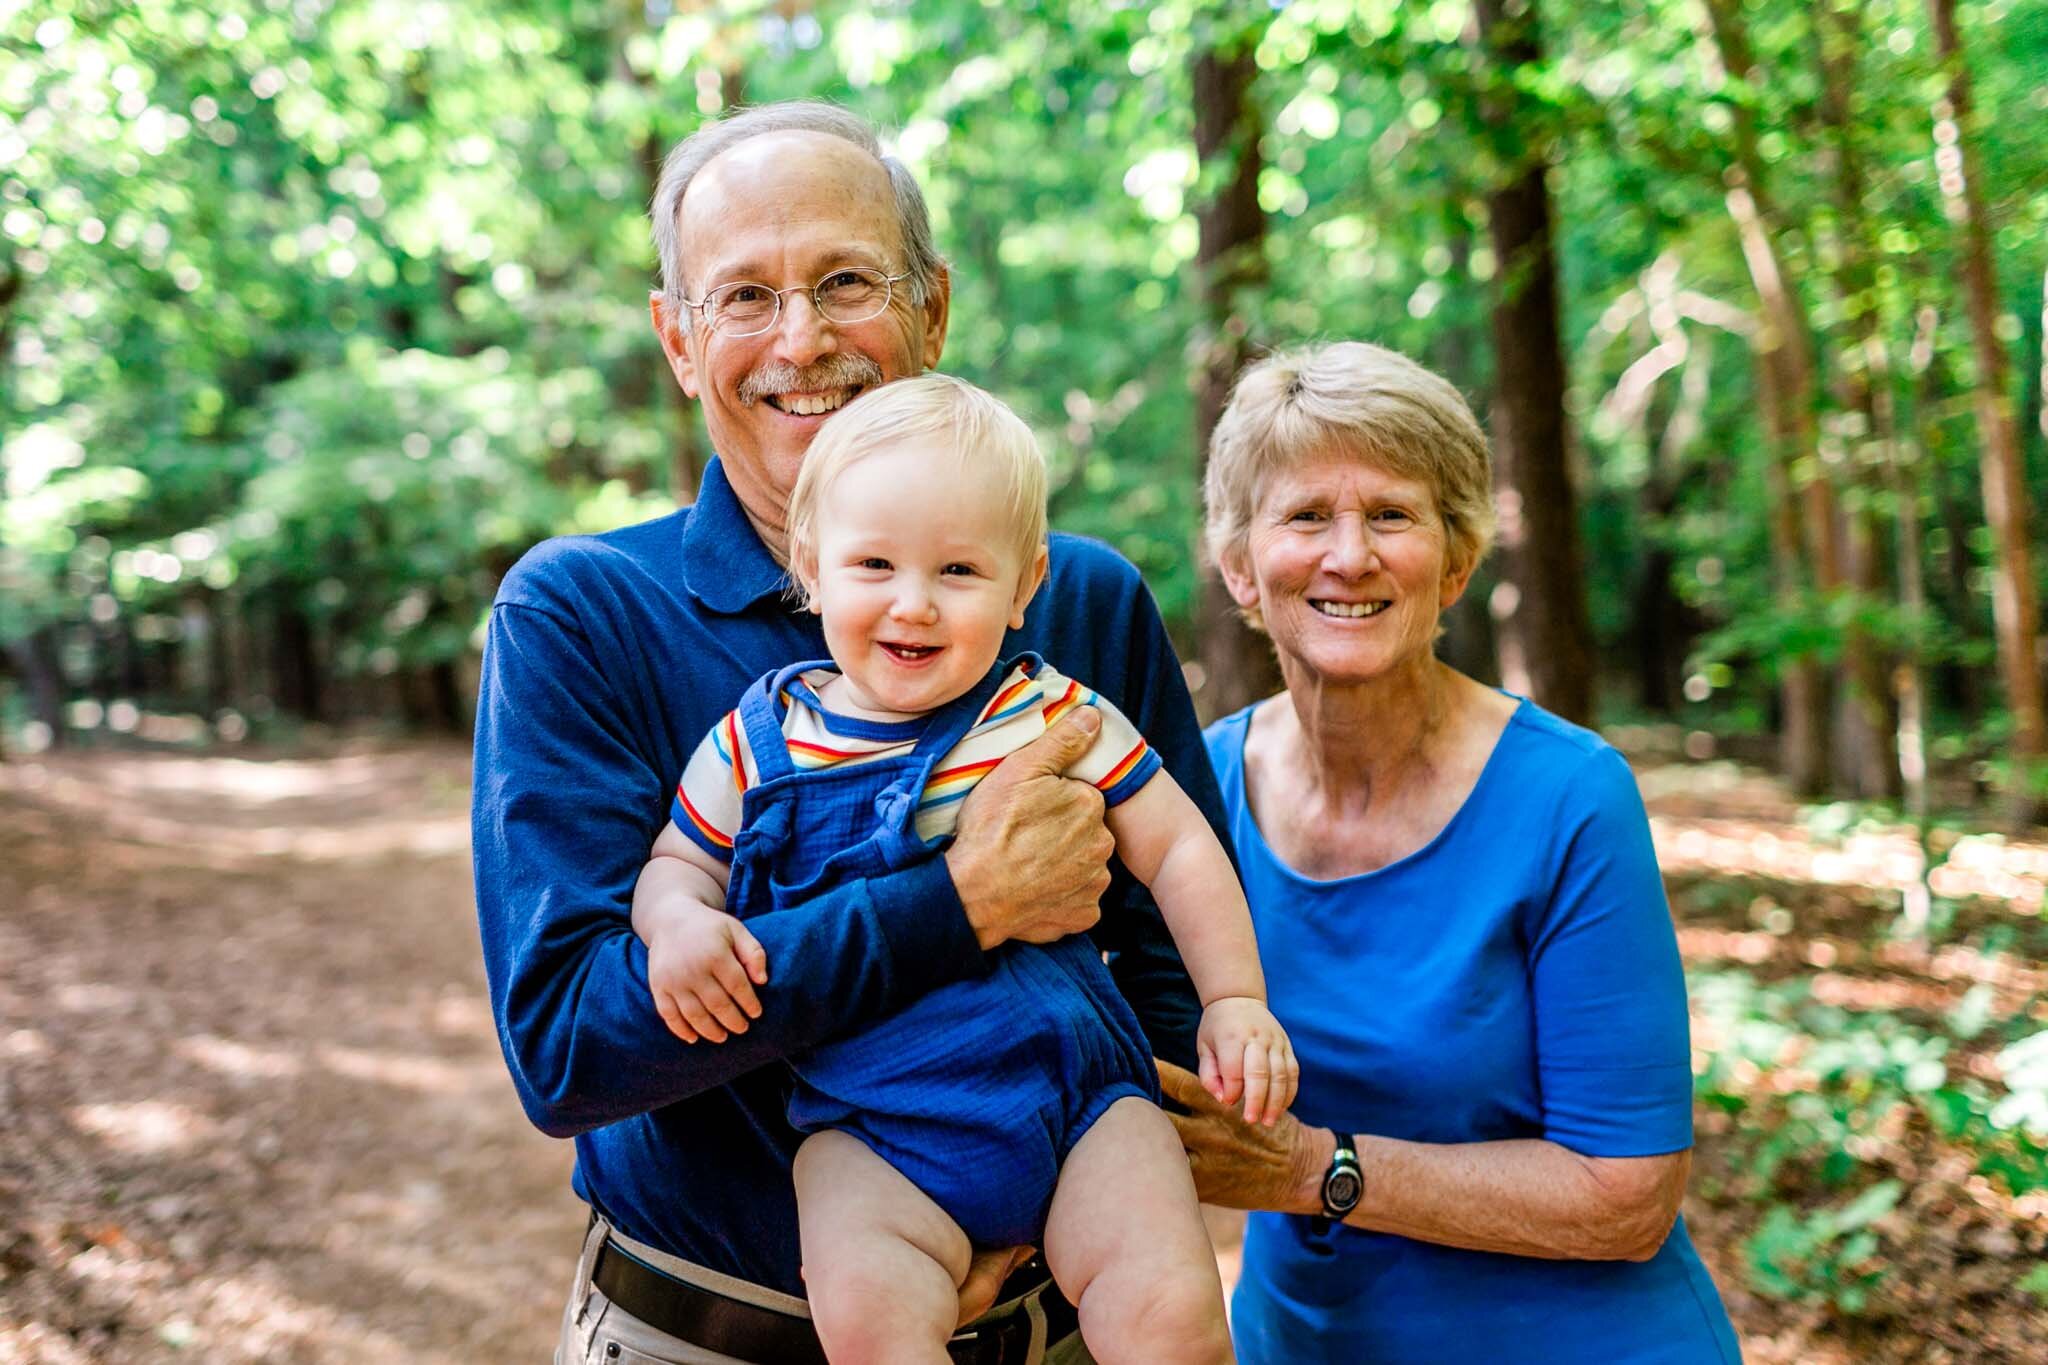 Raleigh Family Photographer | Umstead Park | By G. Lin Photography | Grandparents holding grandson